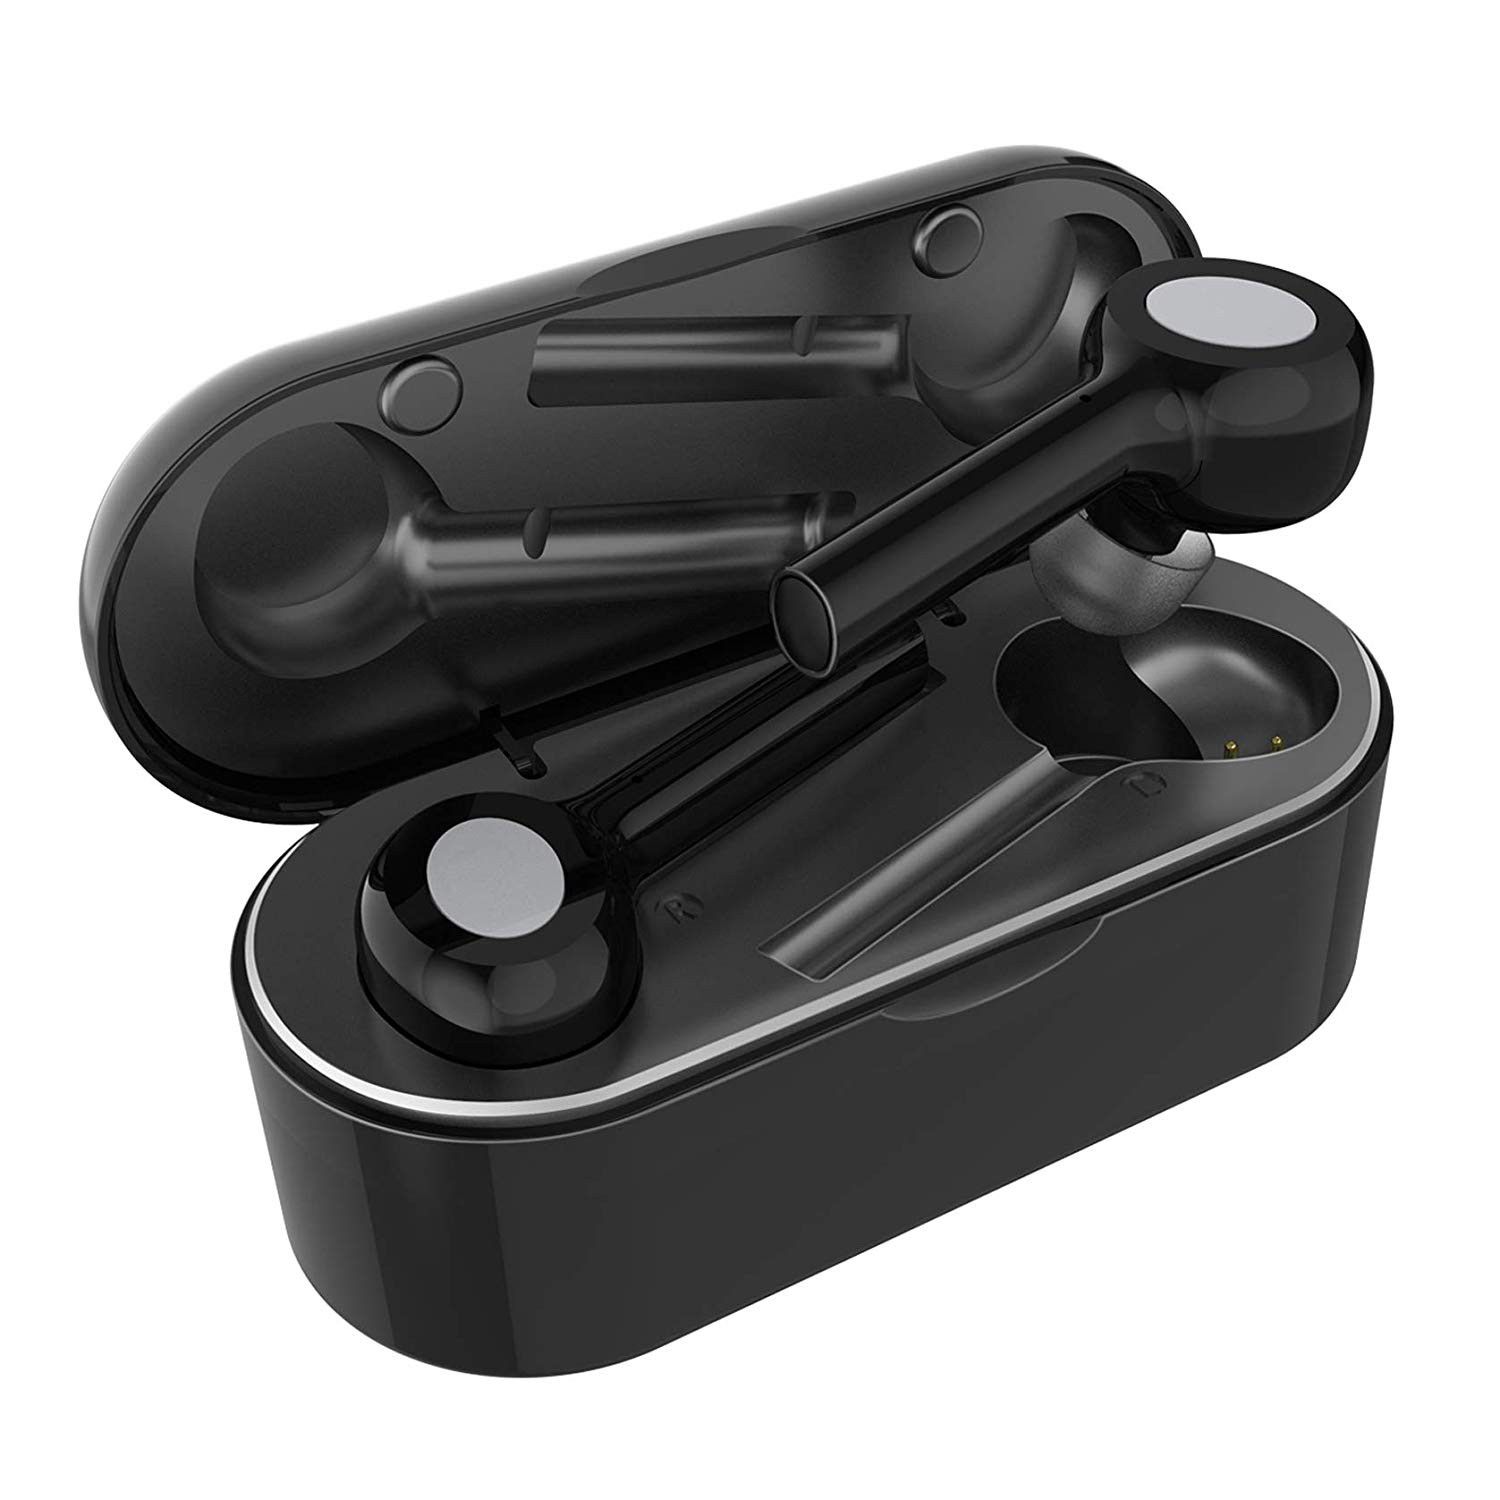 True Wireless Earbuds Bluetooth 5.0 Stereo Bluetooth Headphones TWS in-Ear Headset with Charging